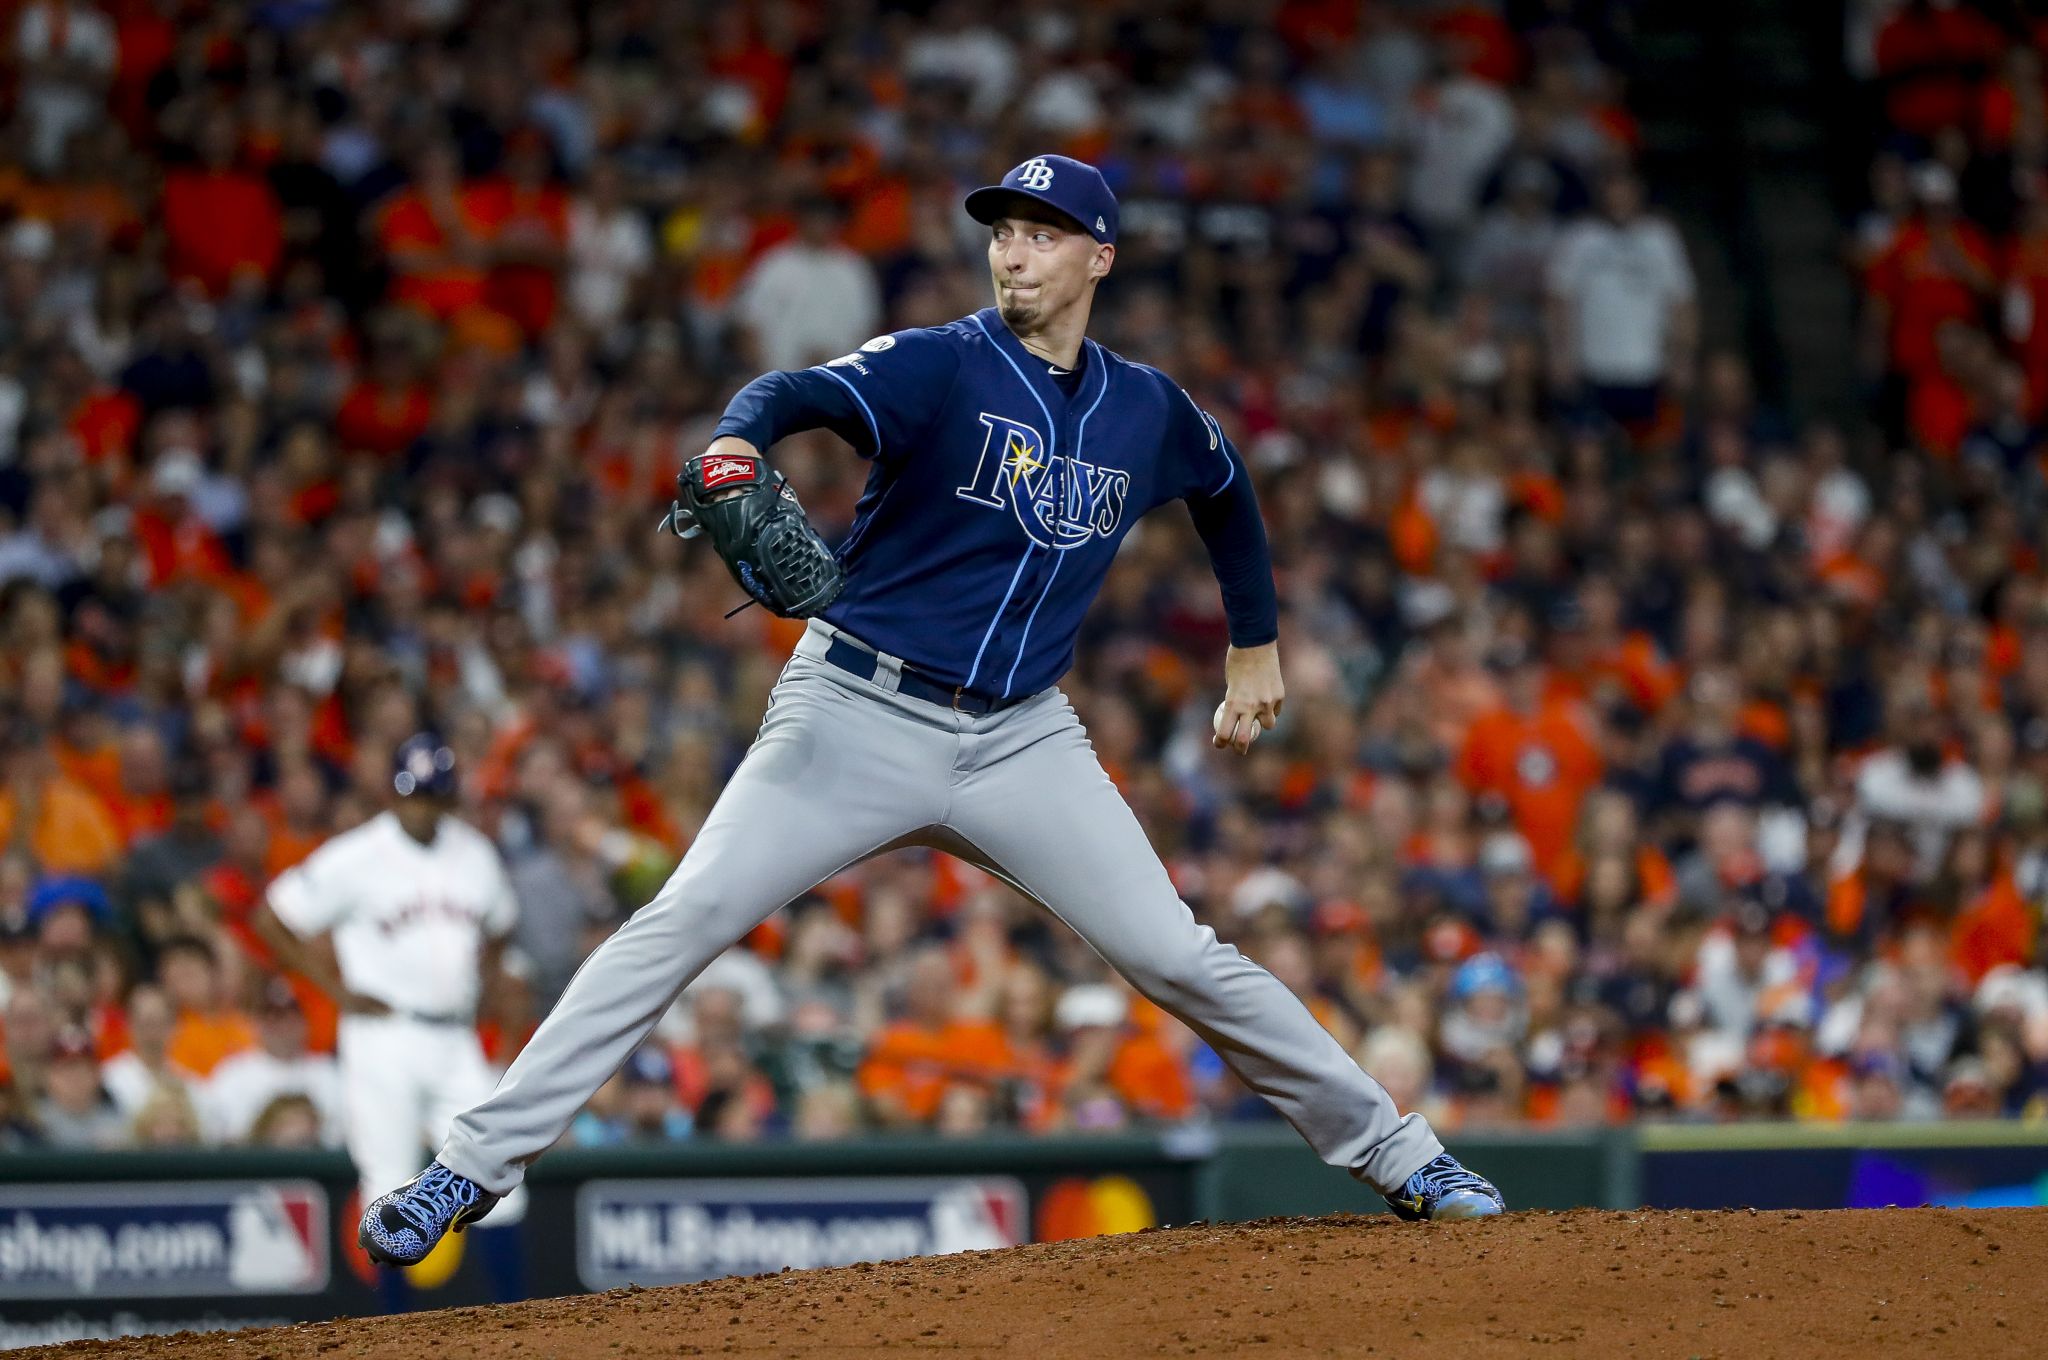 Rays trade Blake Snell to Padres in MLB blockbuster